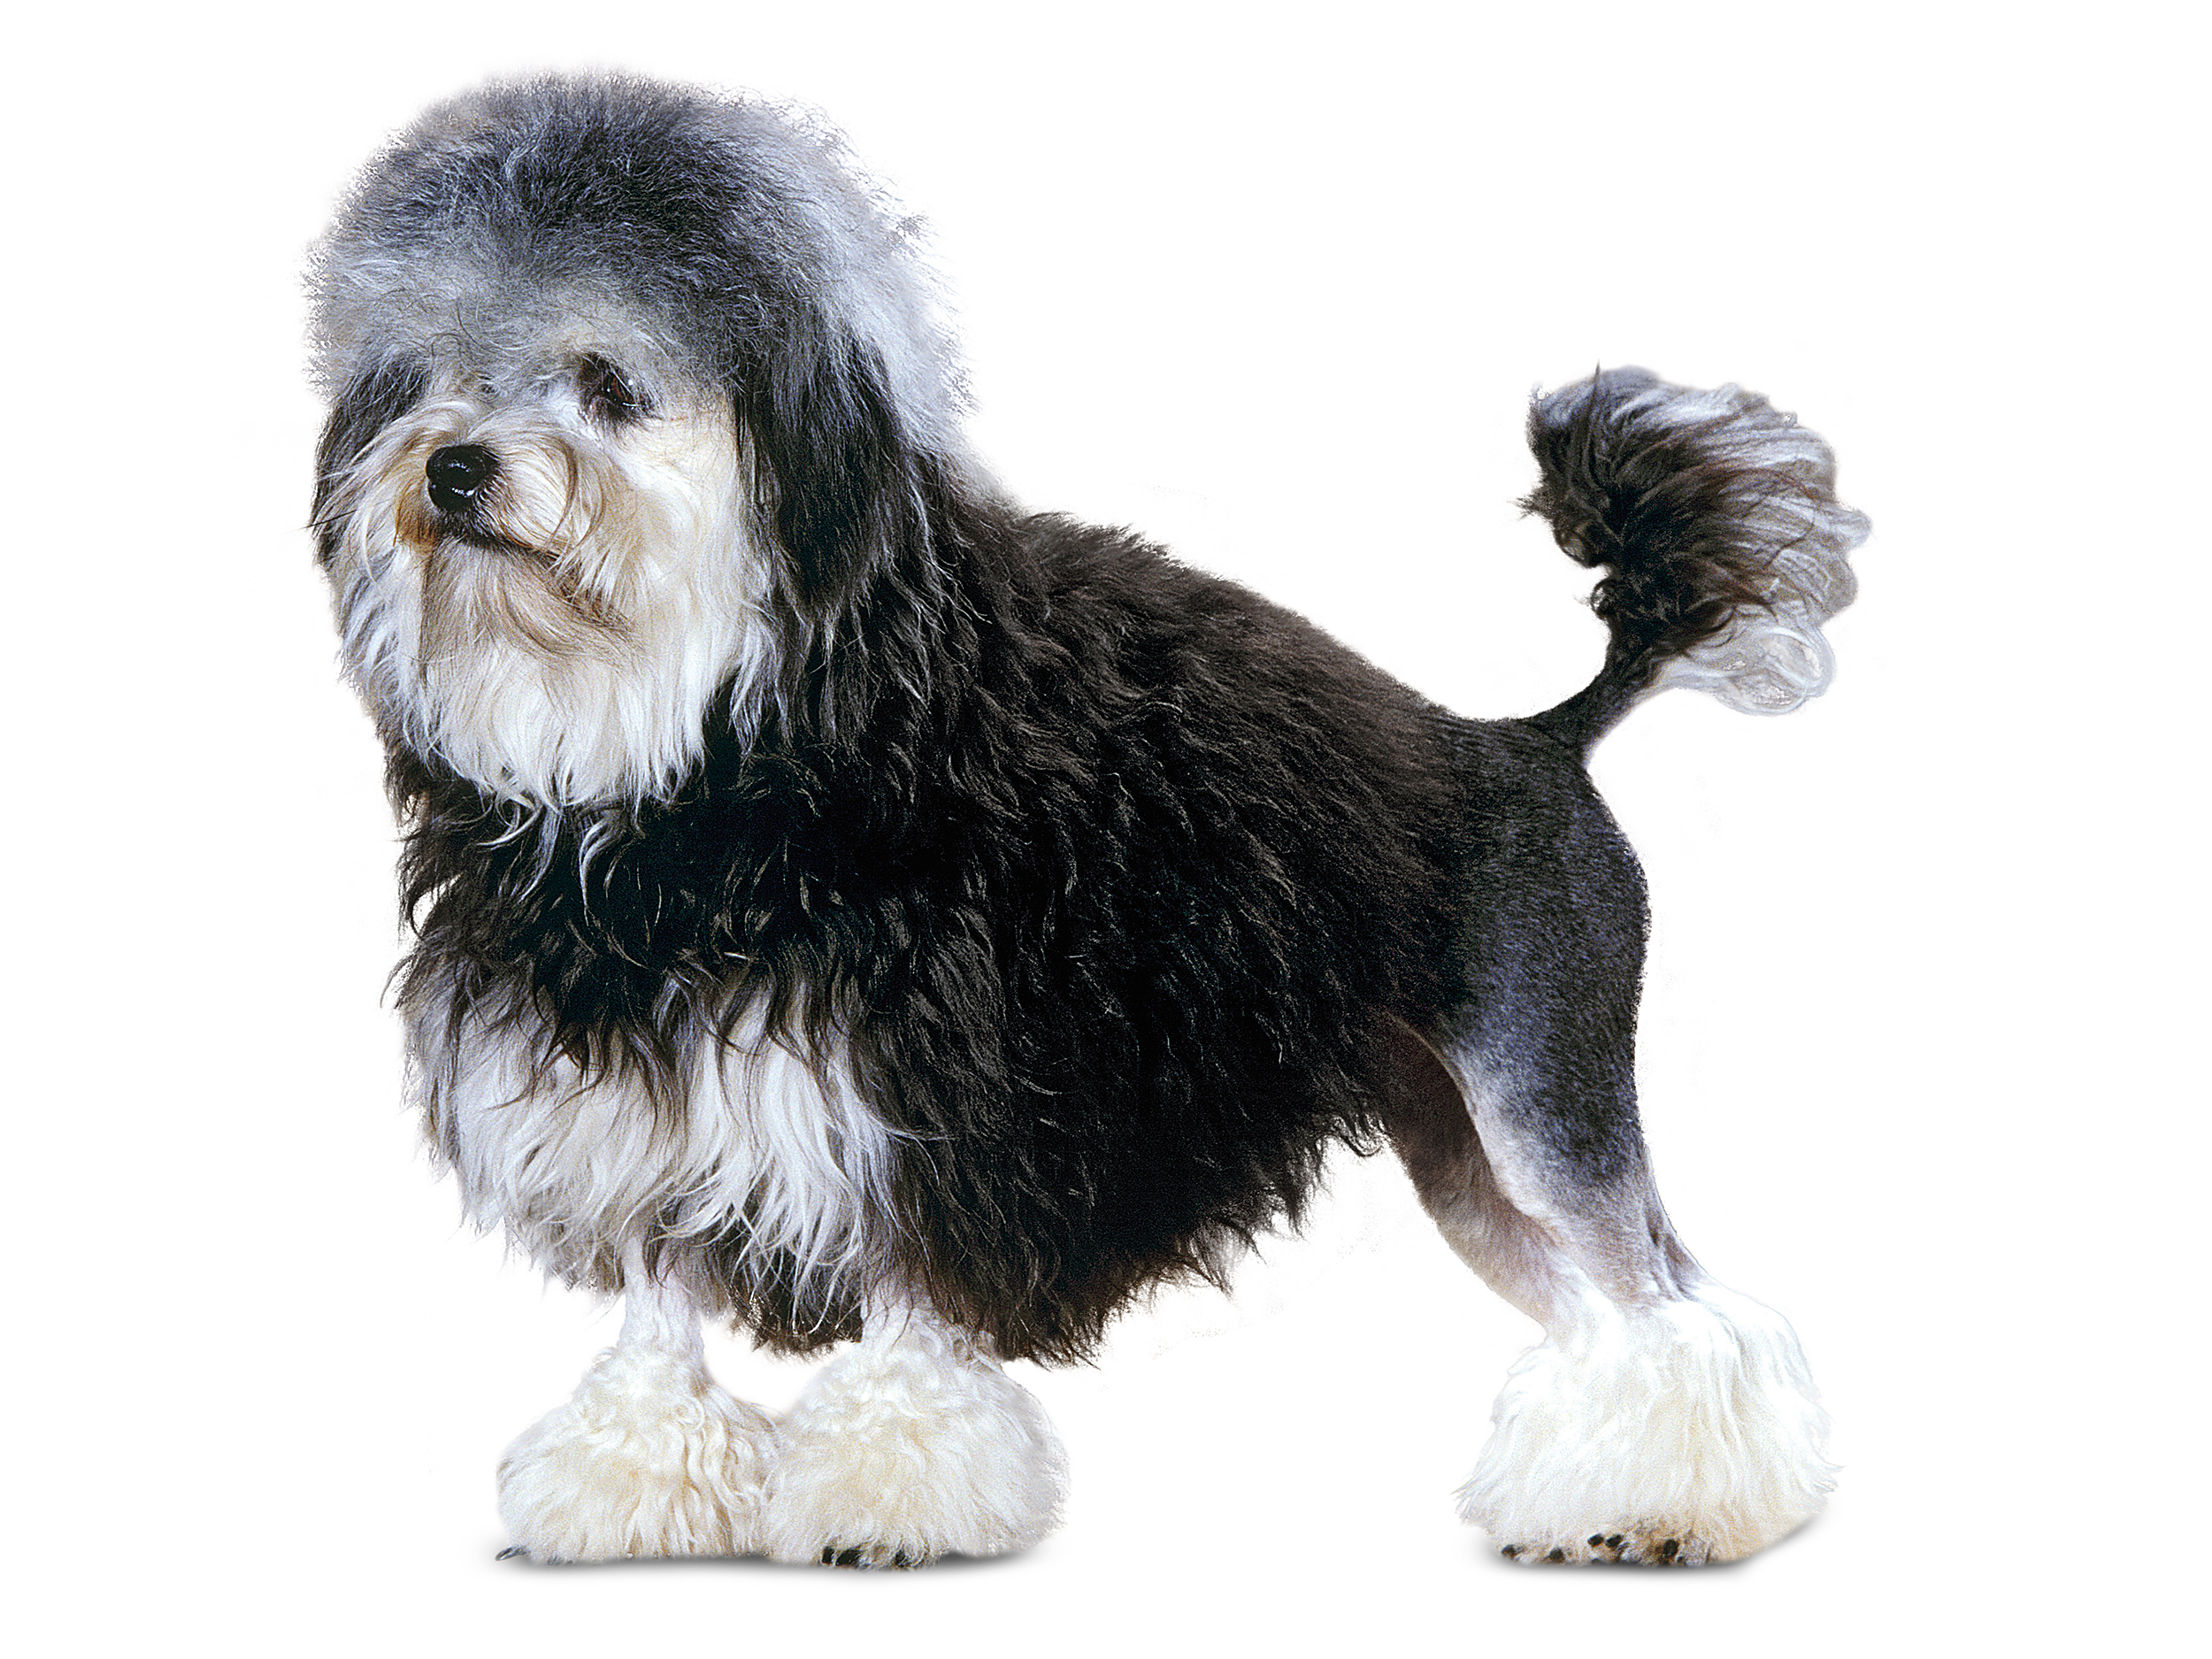 Lowchen - Little Lion Dog adult black and white